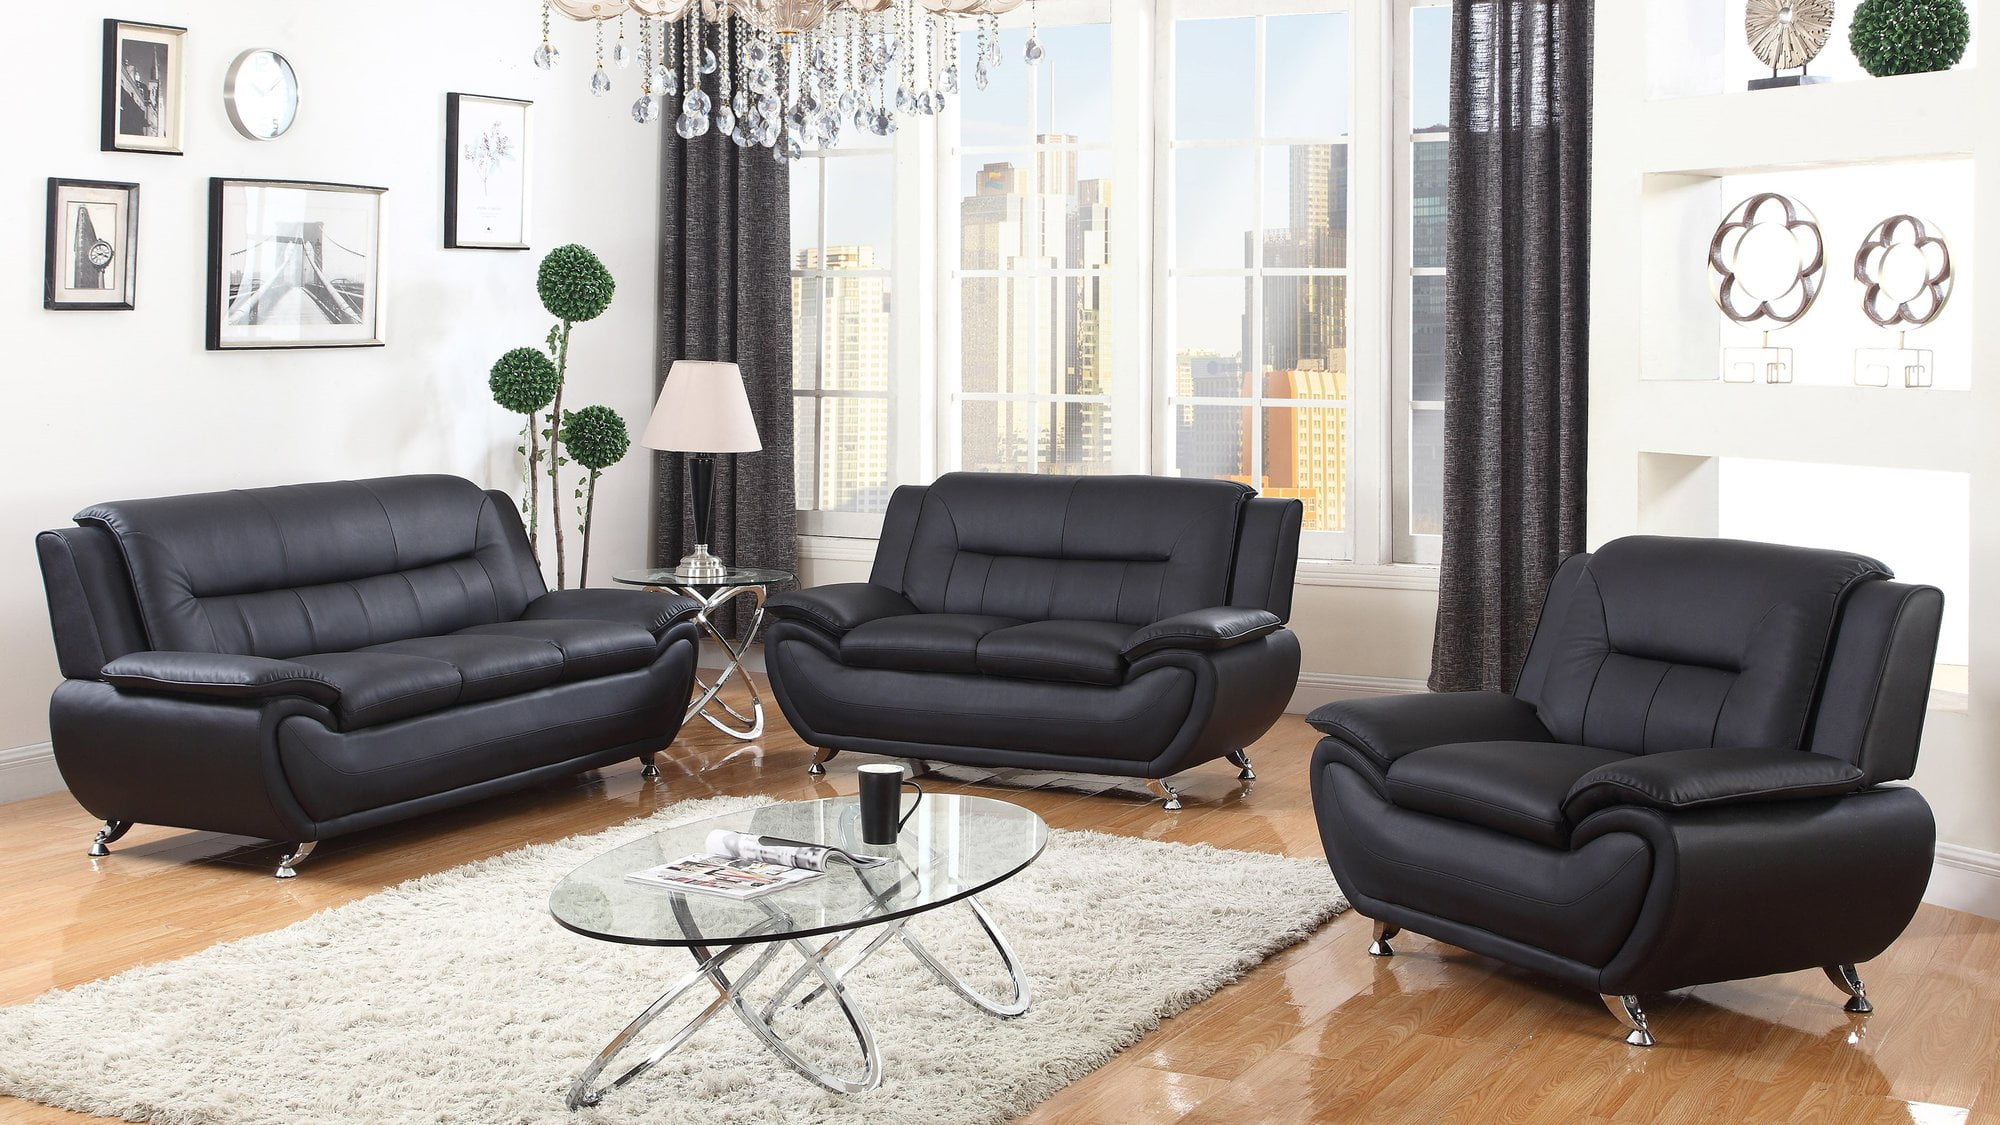 3 Piece Faux Leather Contemporary Living Room Sofa, Love Seat, Chair